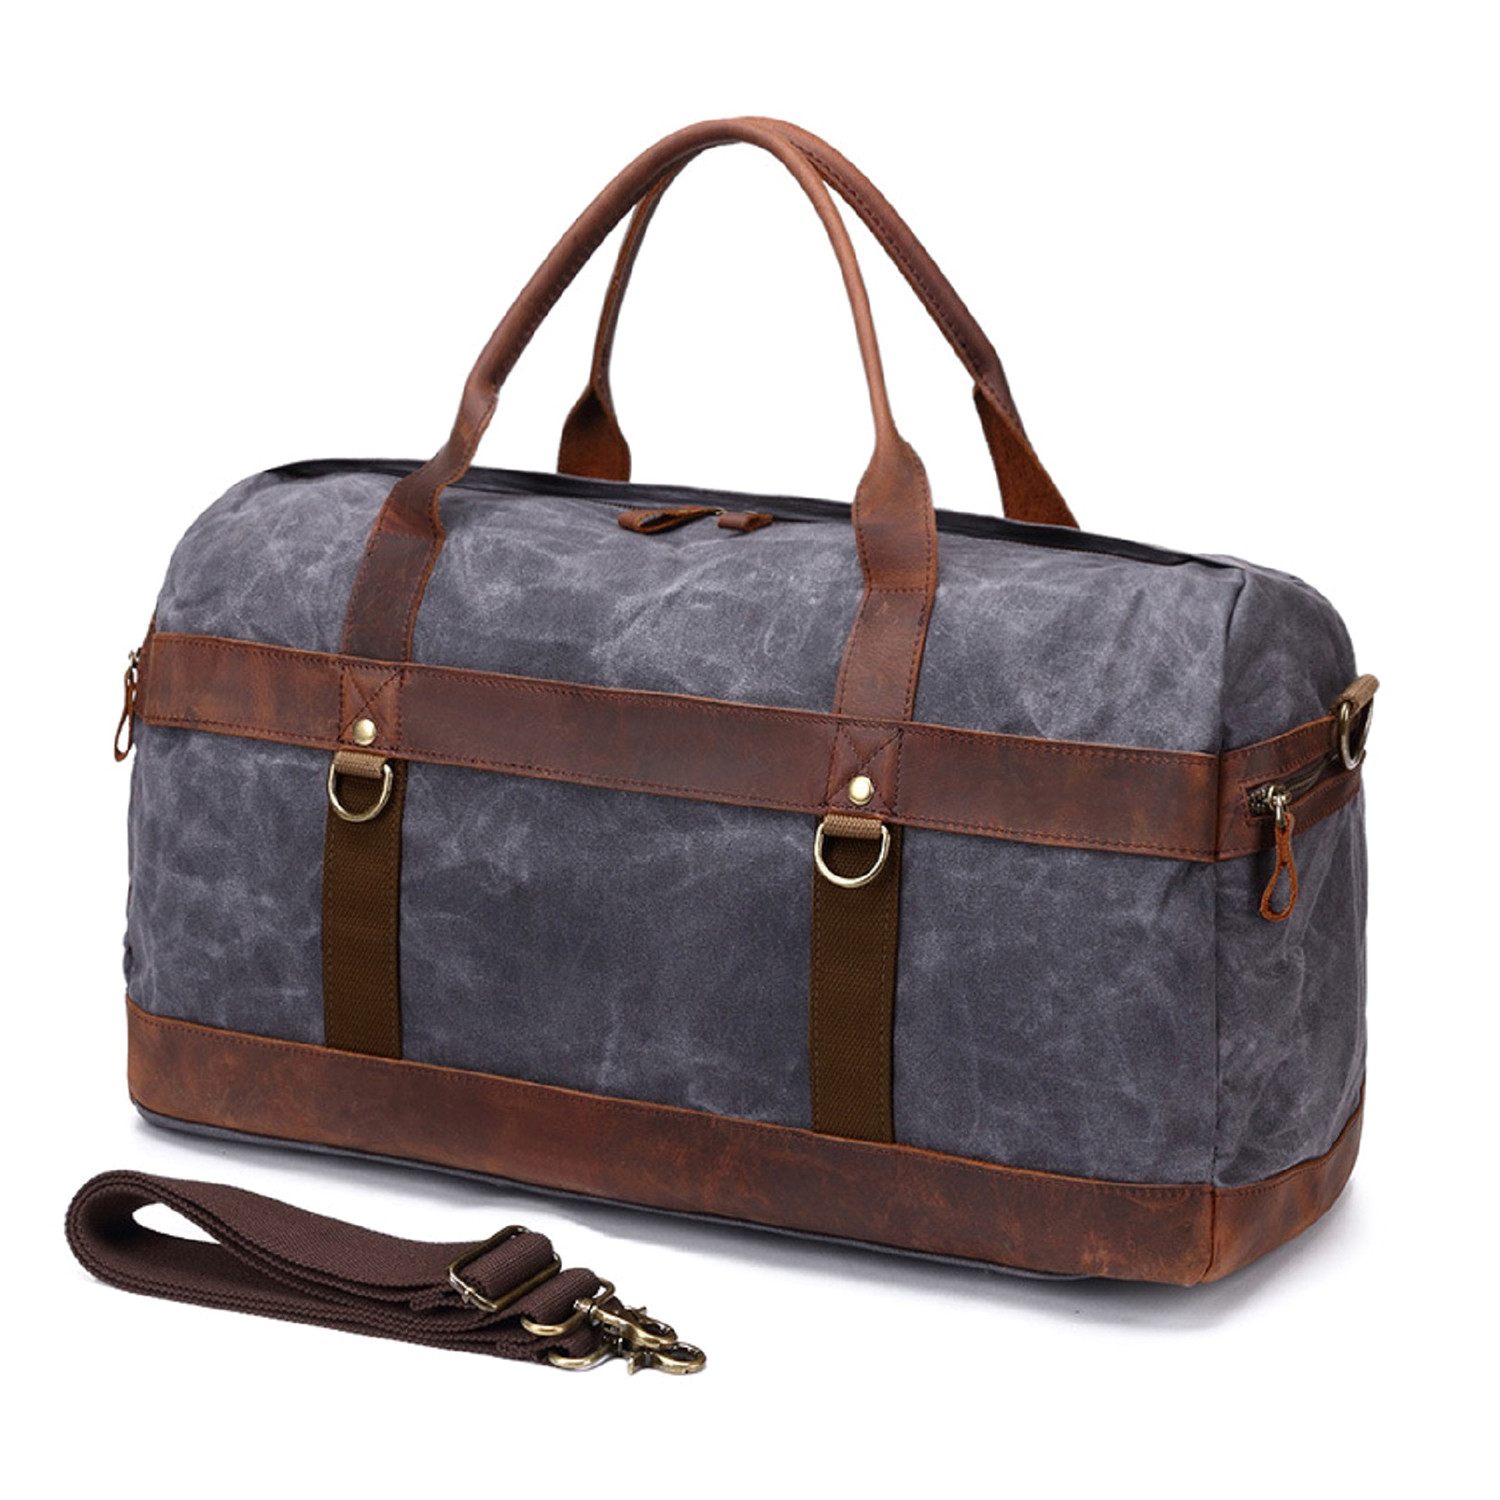 Duffel Bag With Side Zipper // Gray - OwnBag - Touch of Modern